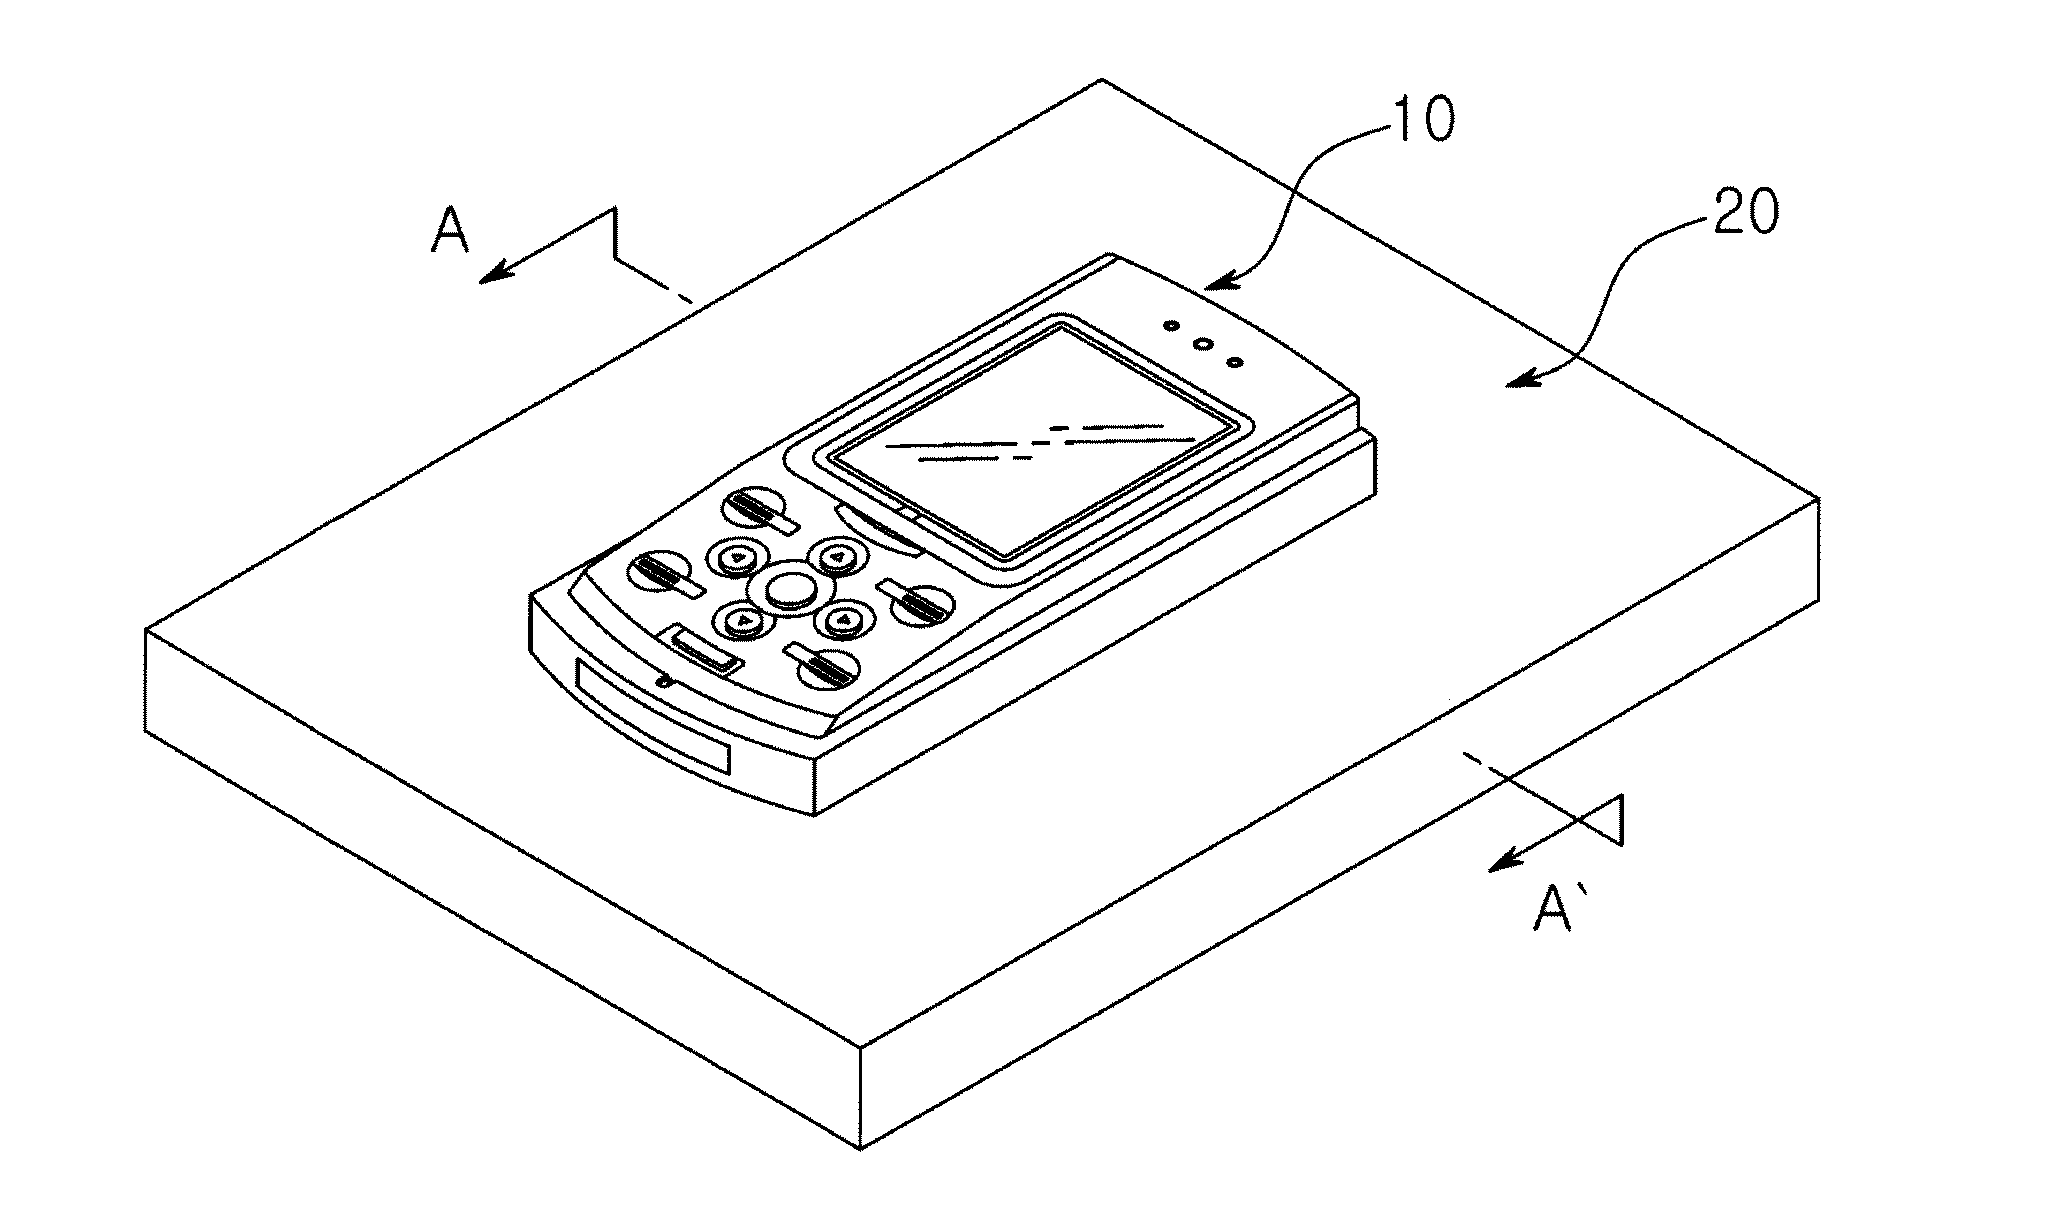 Contactless power transmission device and electronic device having the same